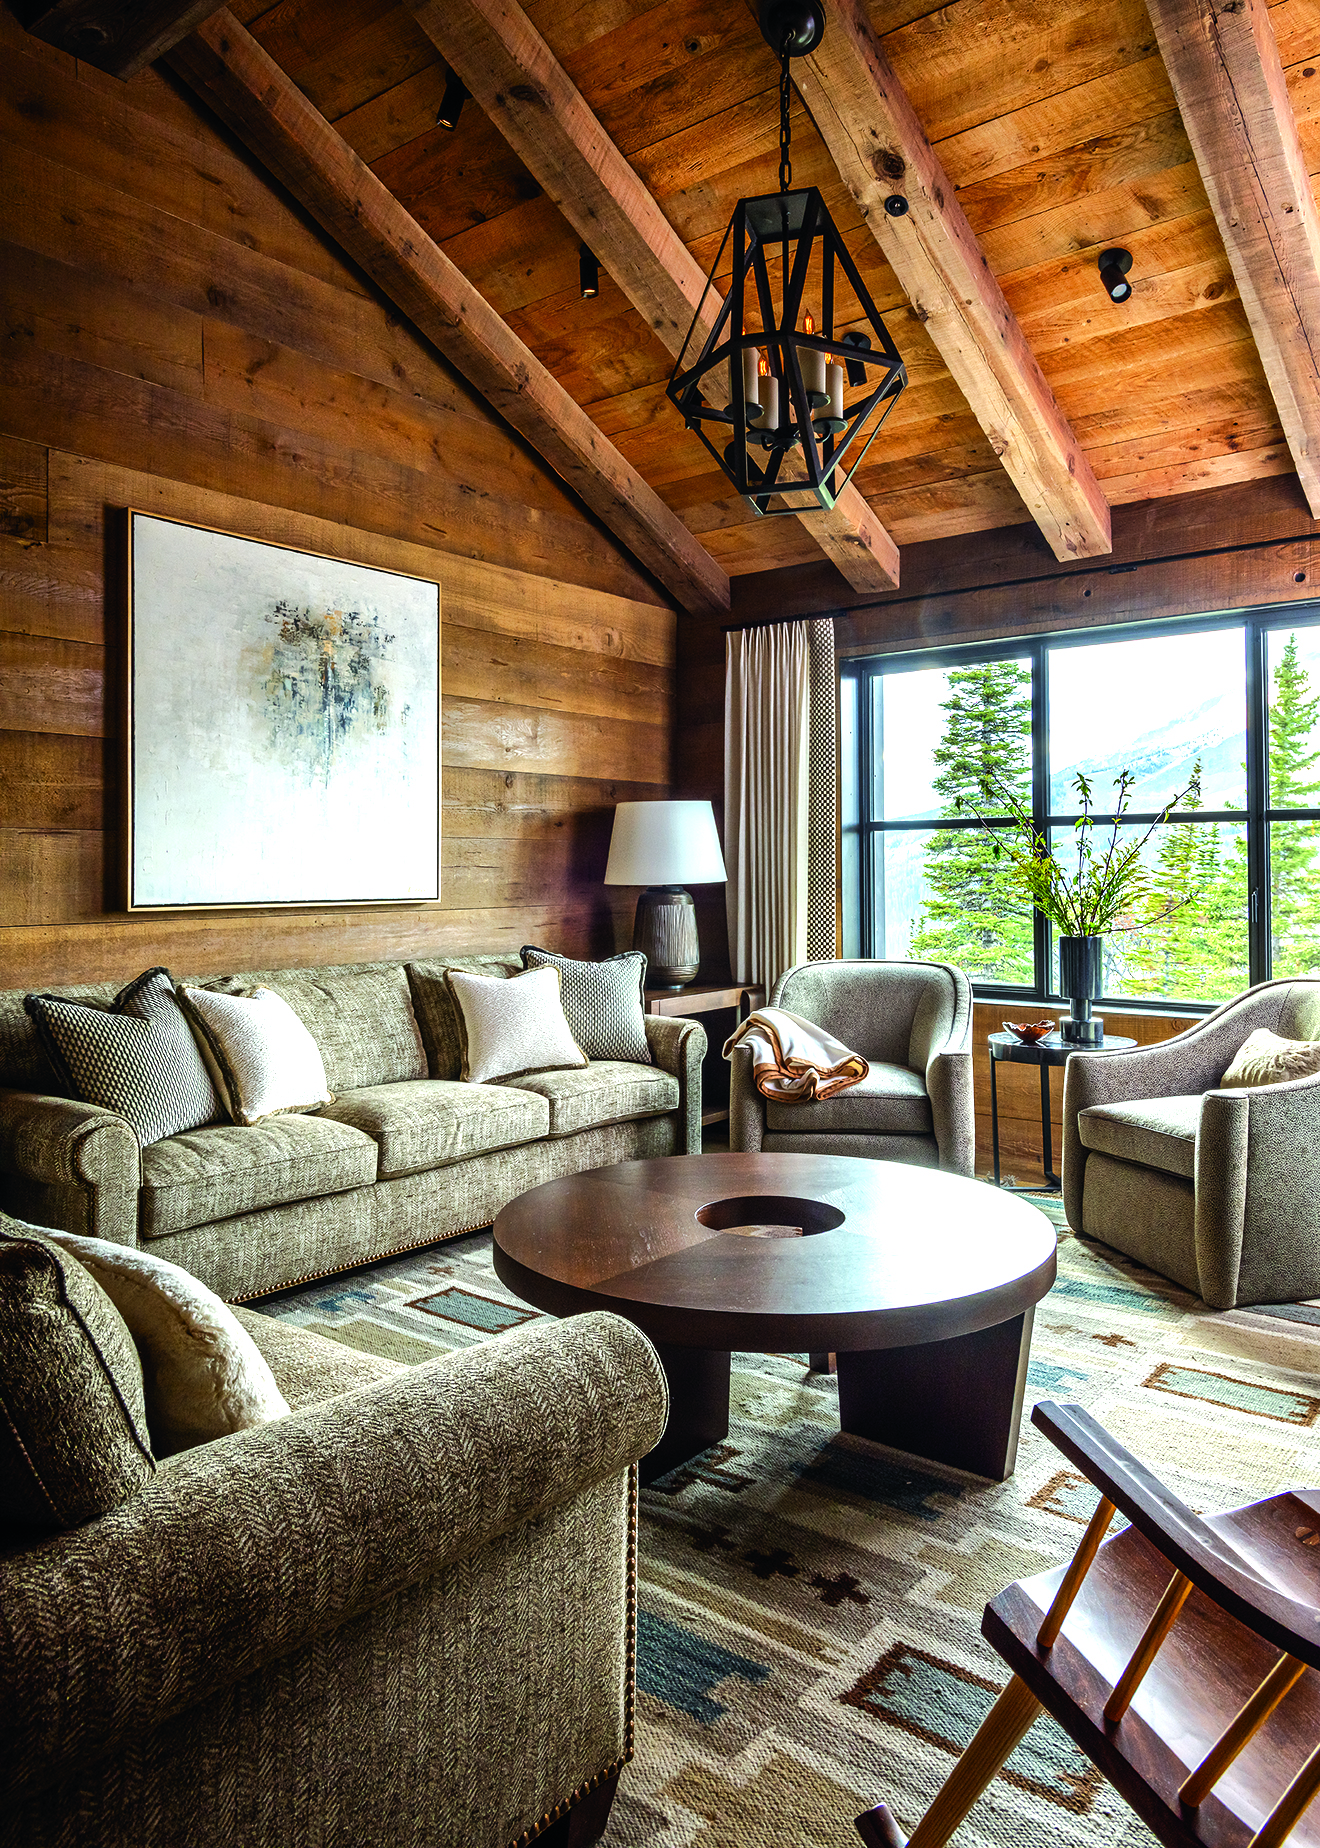 A Modern Chalet Home With A Seamless Blend Of Rustic And Refined ...